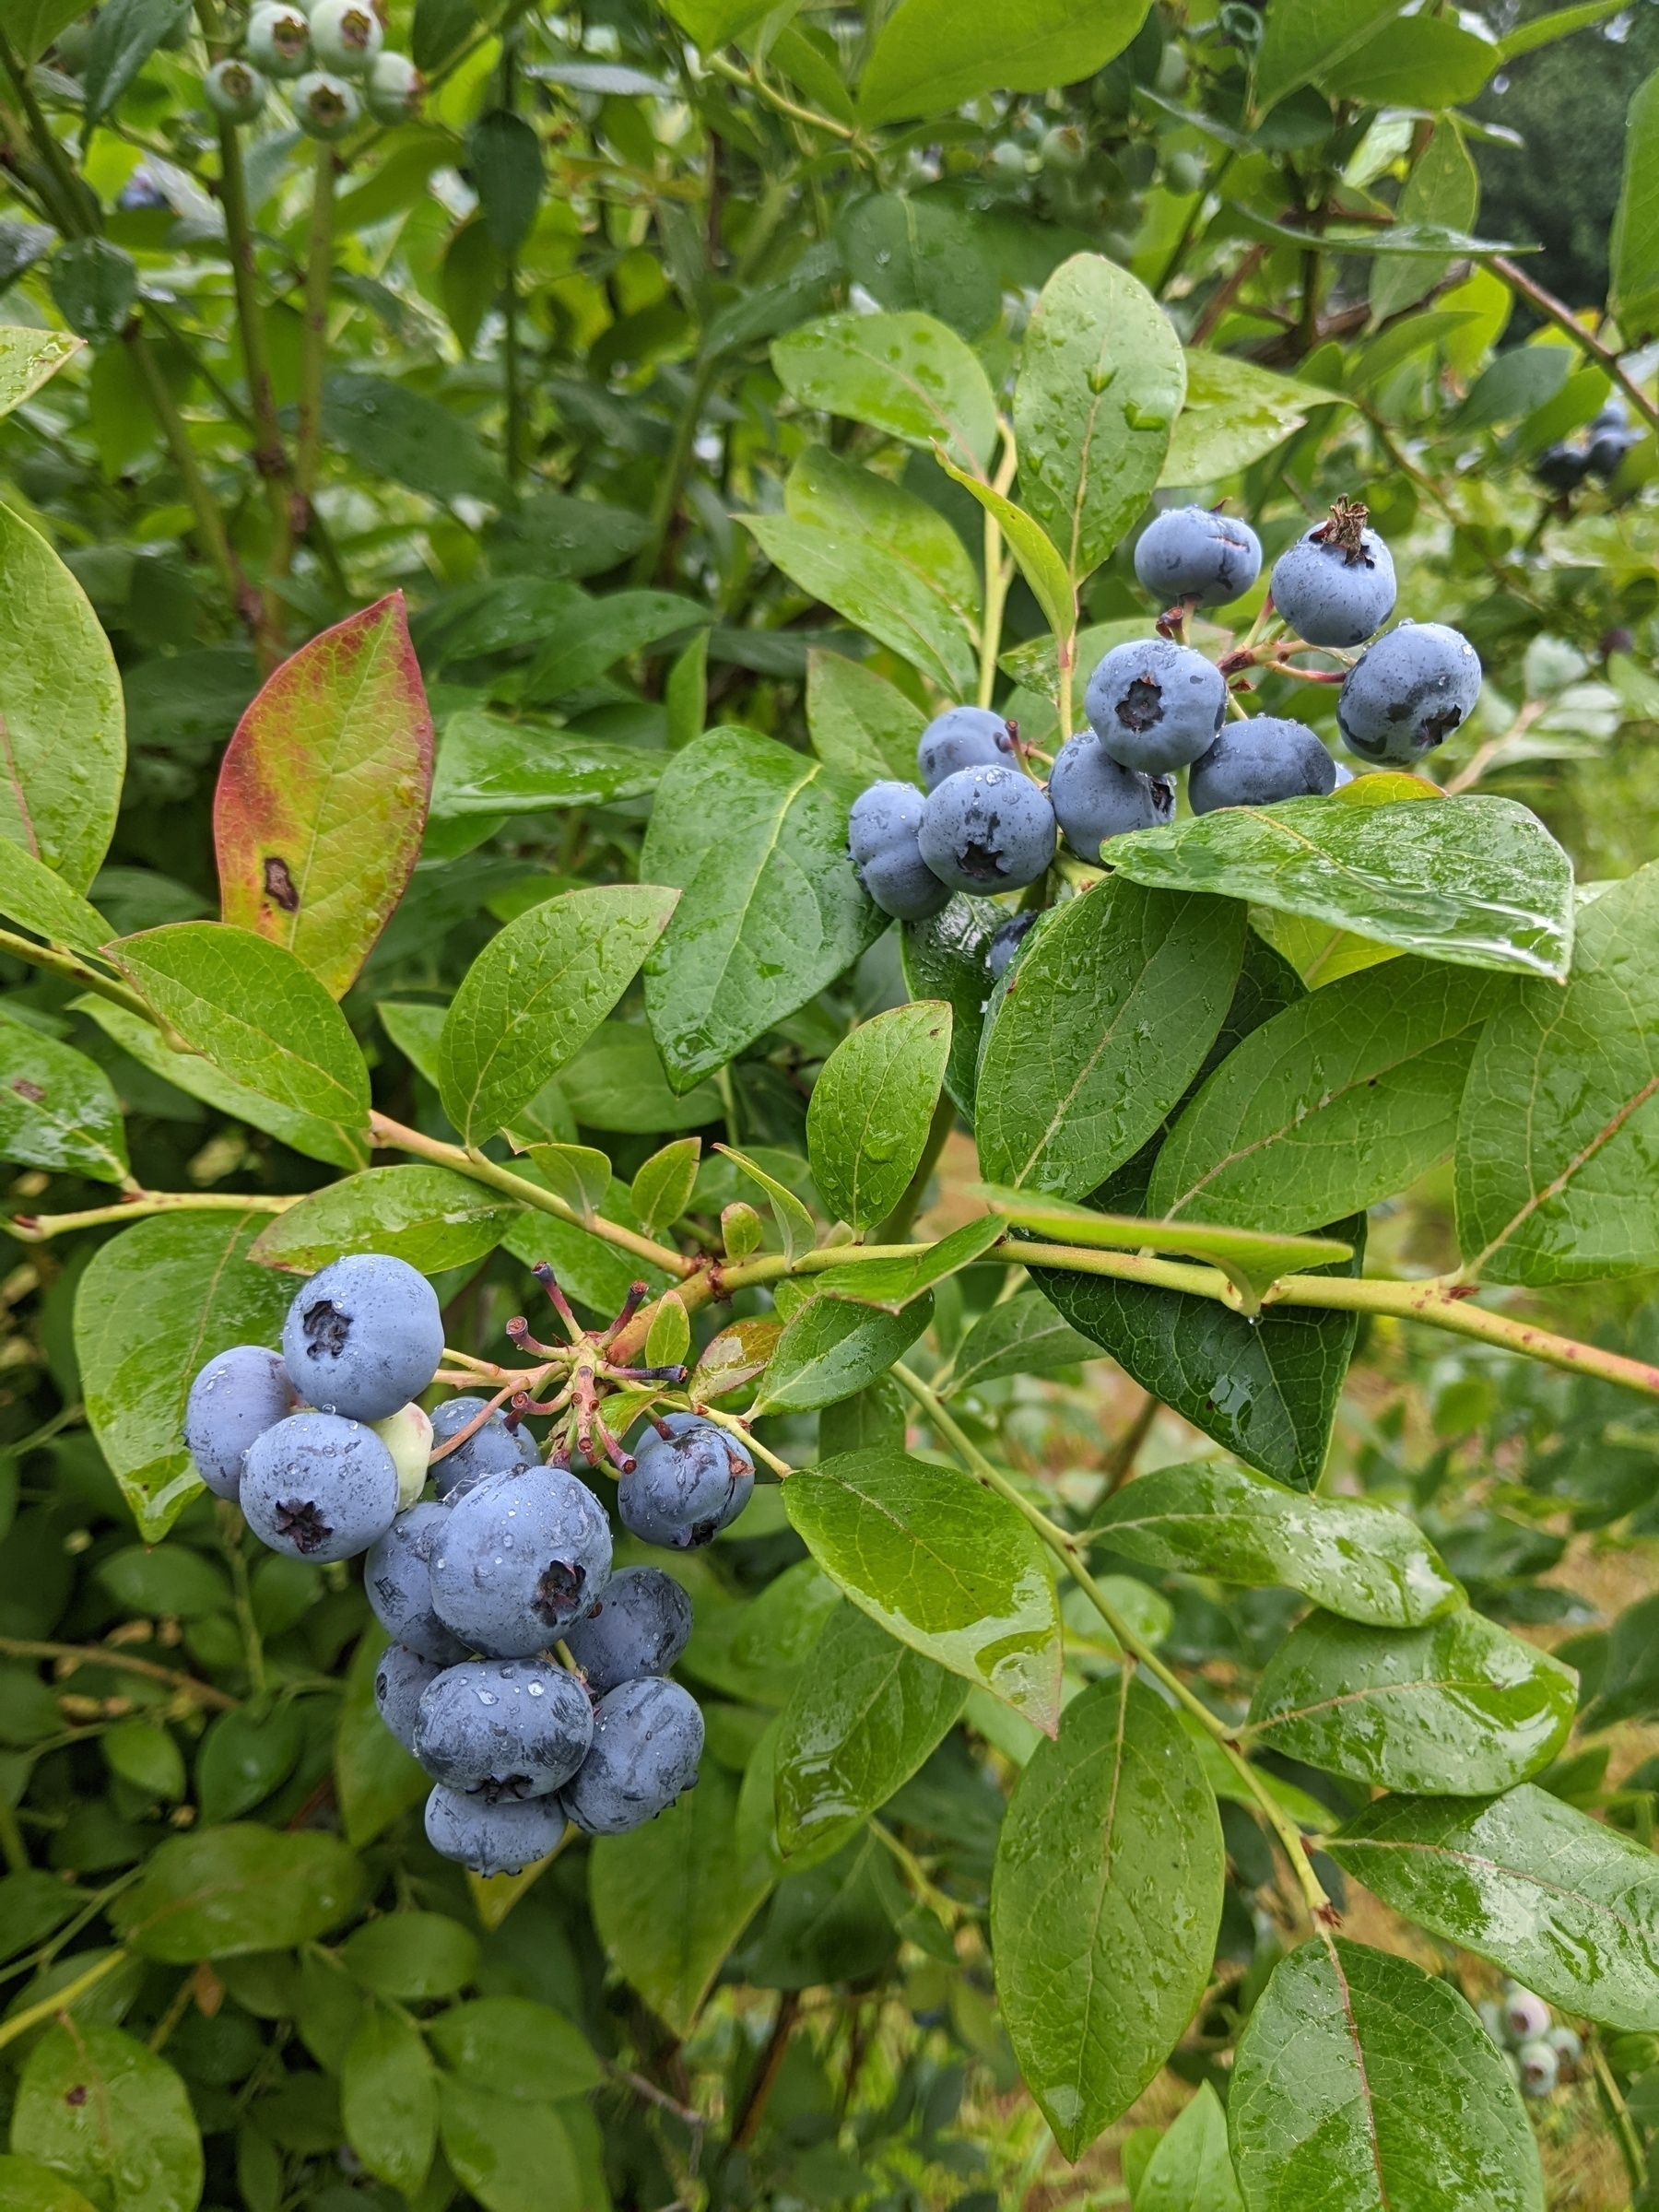 plump, dusky ripe blueberries in two clumps hang from a blueberry shrub 